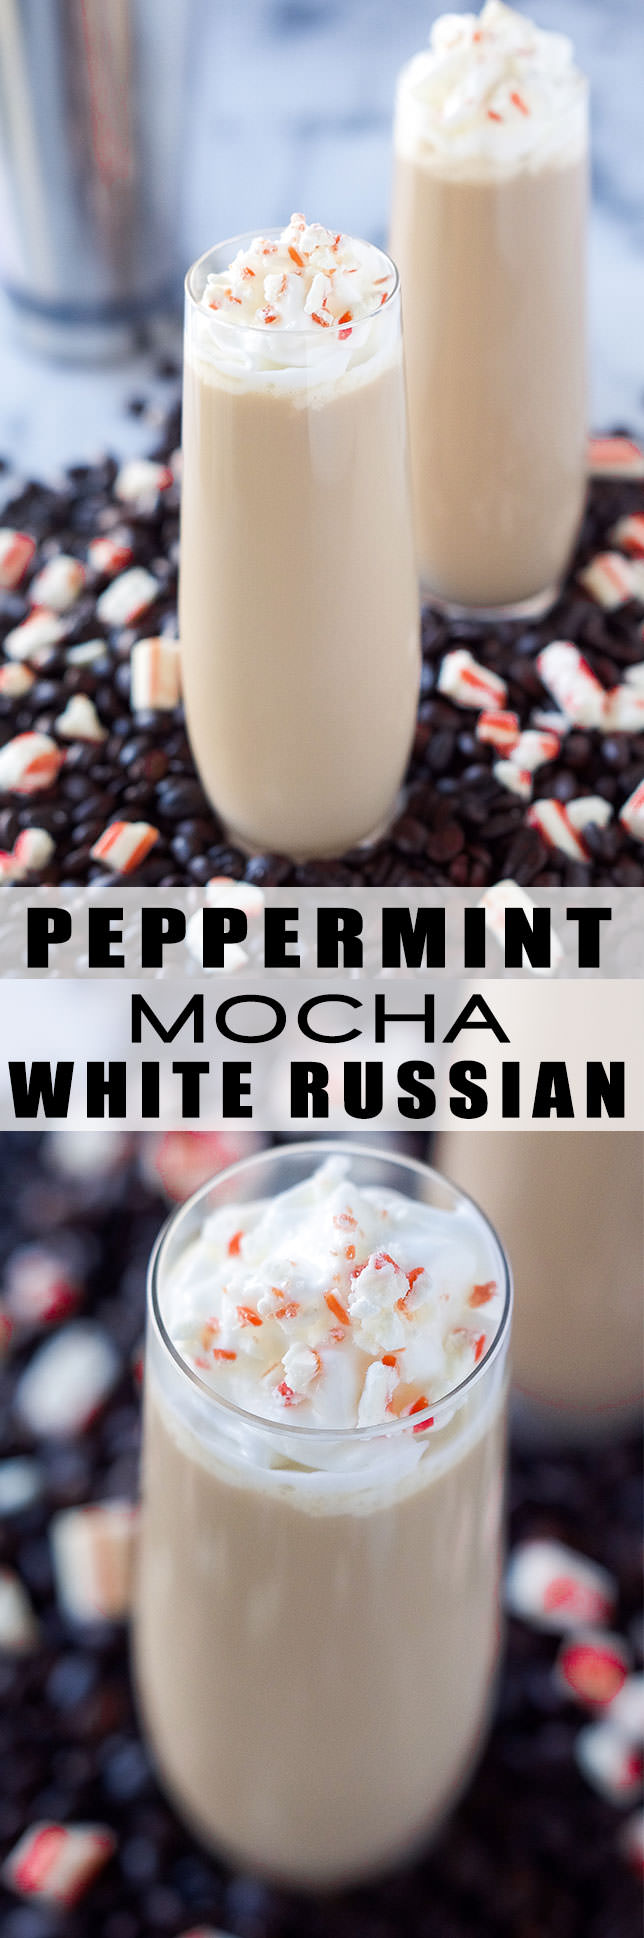 This Peppermint Mocha White Russian is a festive cocktail! The classic drink with a peppermint and chocolate twist! 